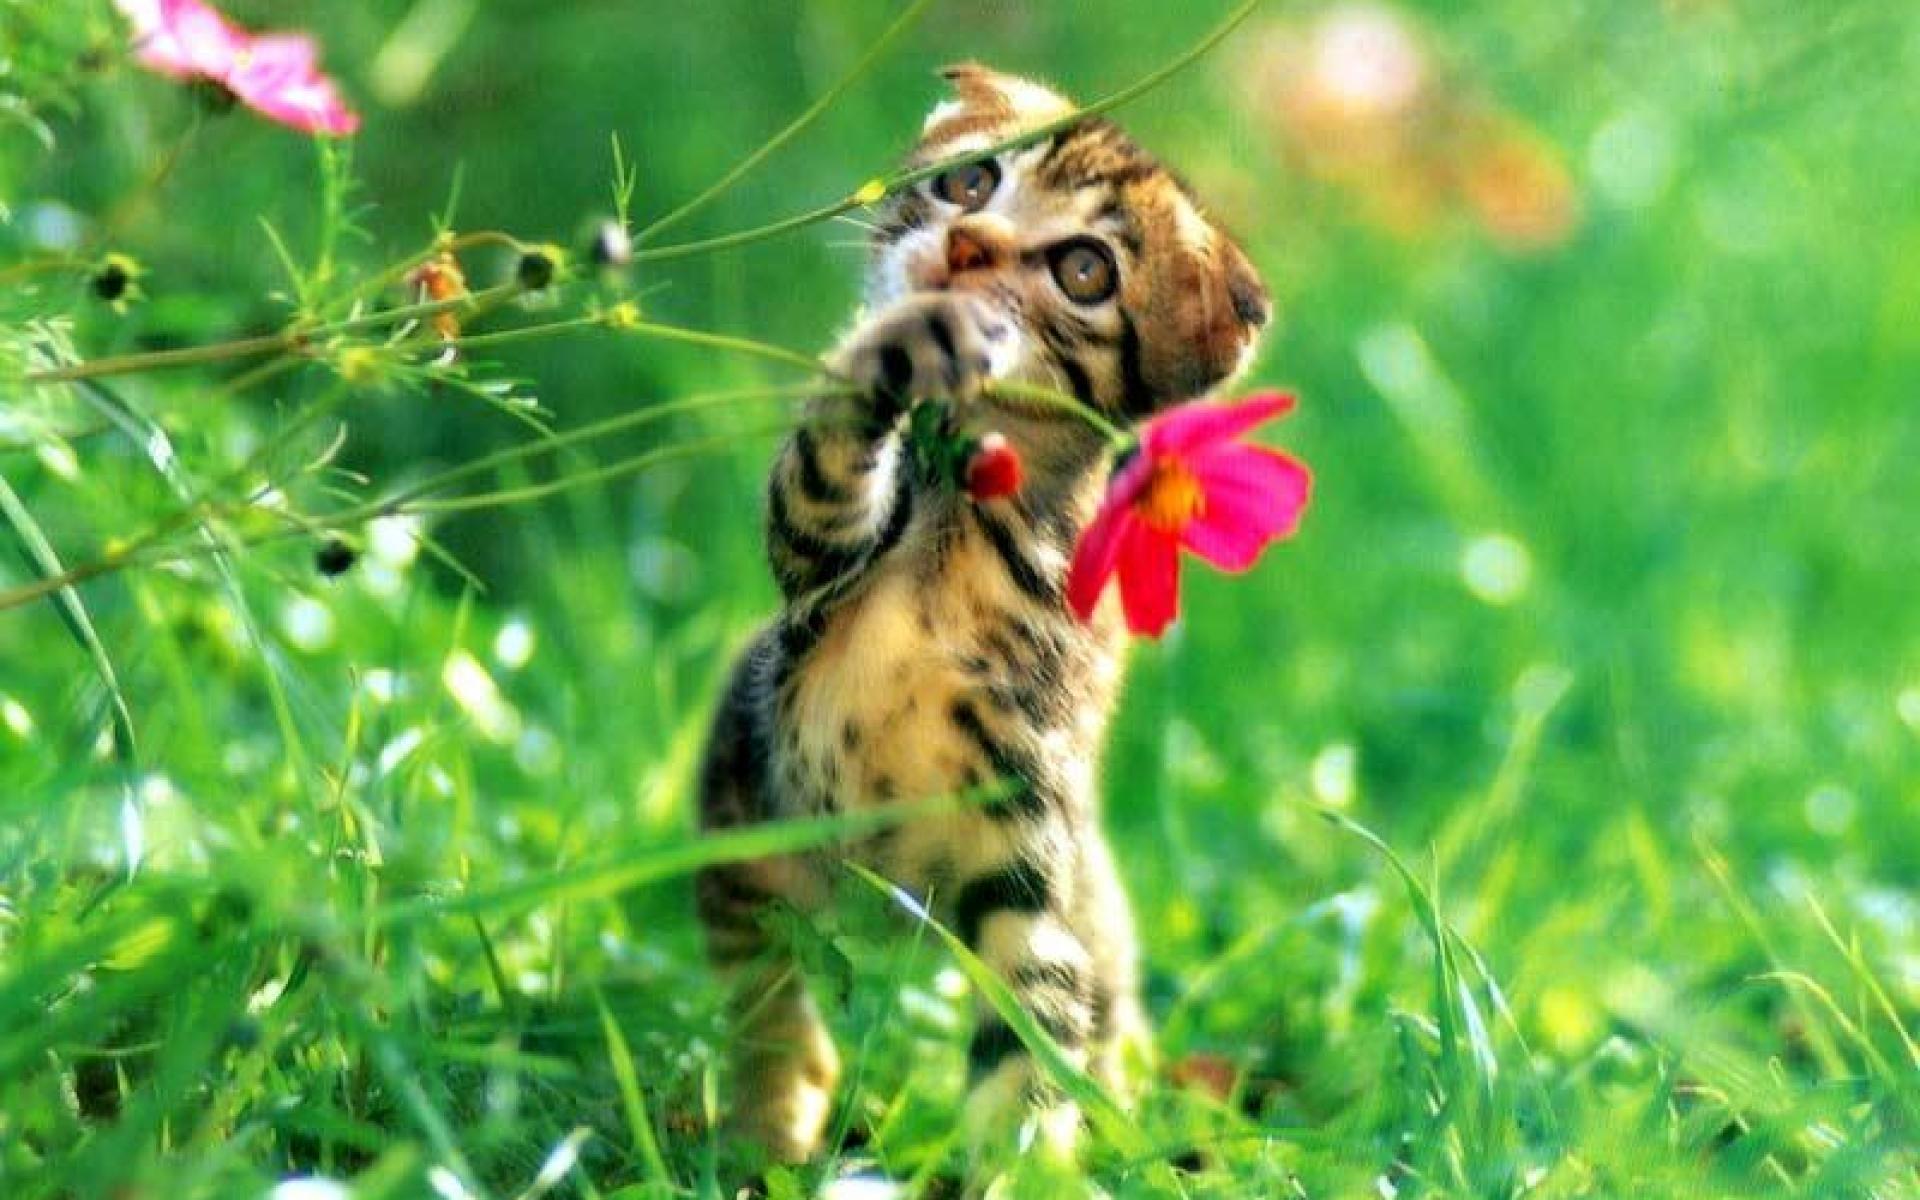 Spring Cat Wallpapers - Top Free Spring Cat Backgrounds - WallpaperAccess